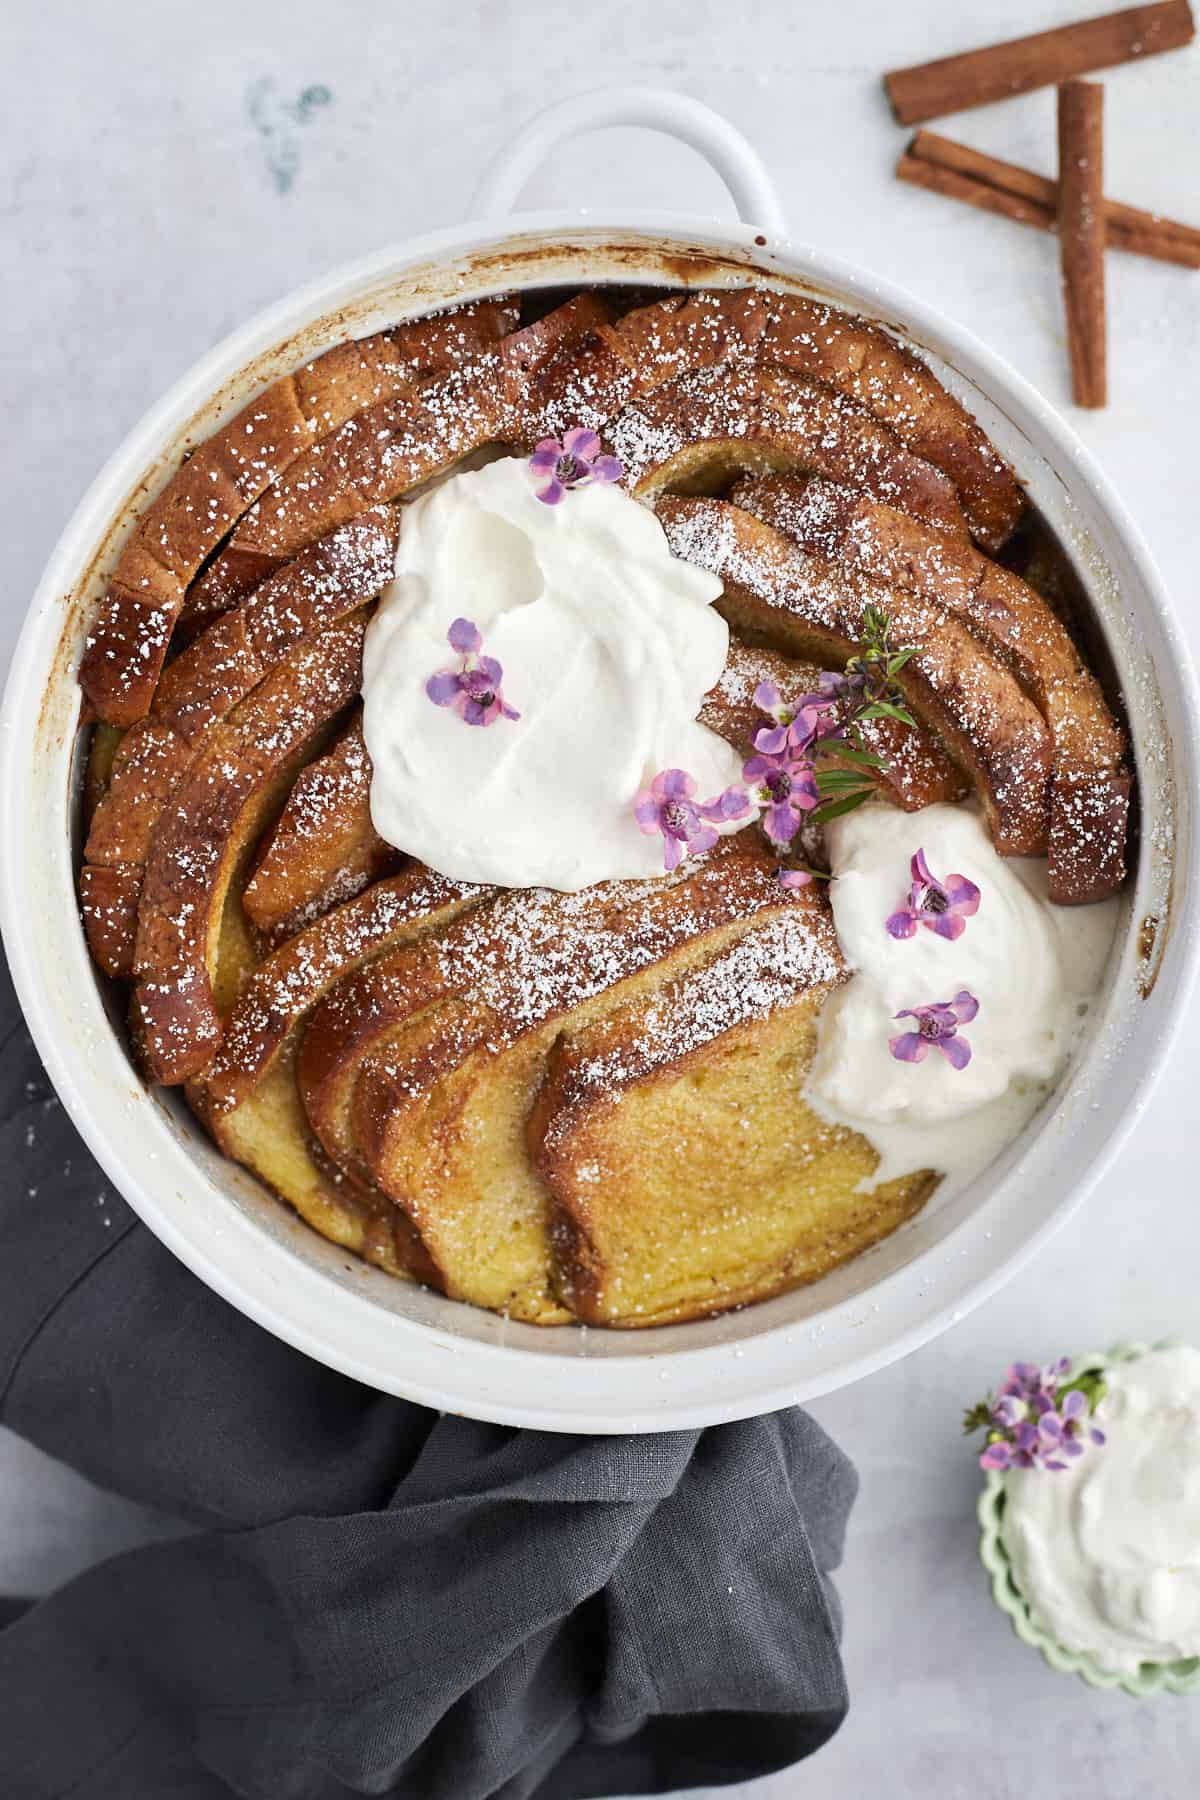 The Best French Toast Recipe (Brioche French Toast) - Dessert for Two